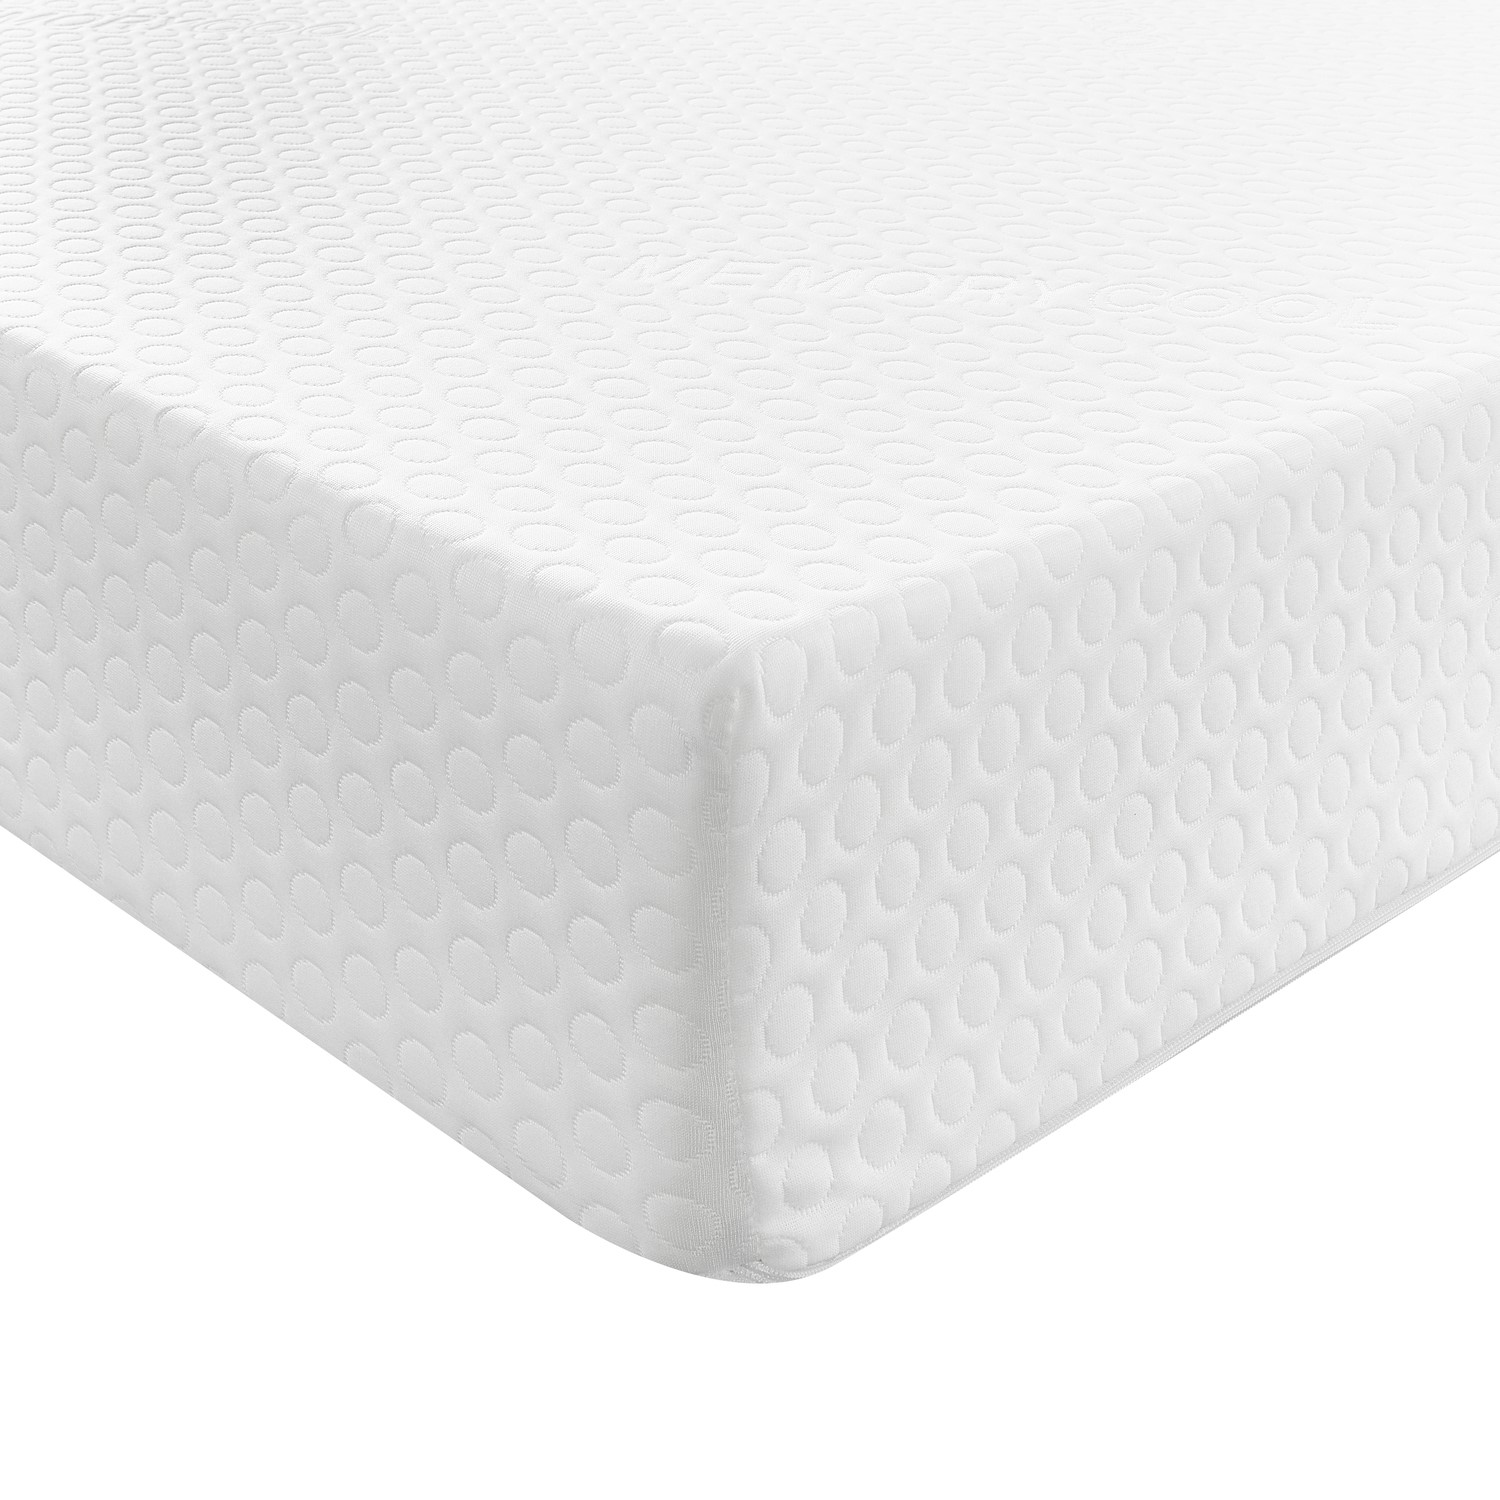 Photo of Super king memory foam rolled hypoallergenic mattress with removable cover - aspire